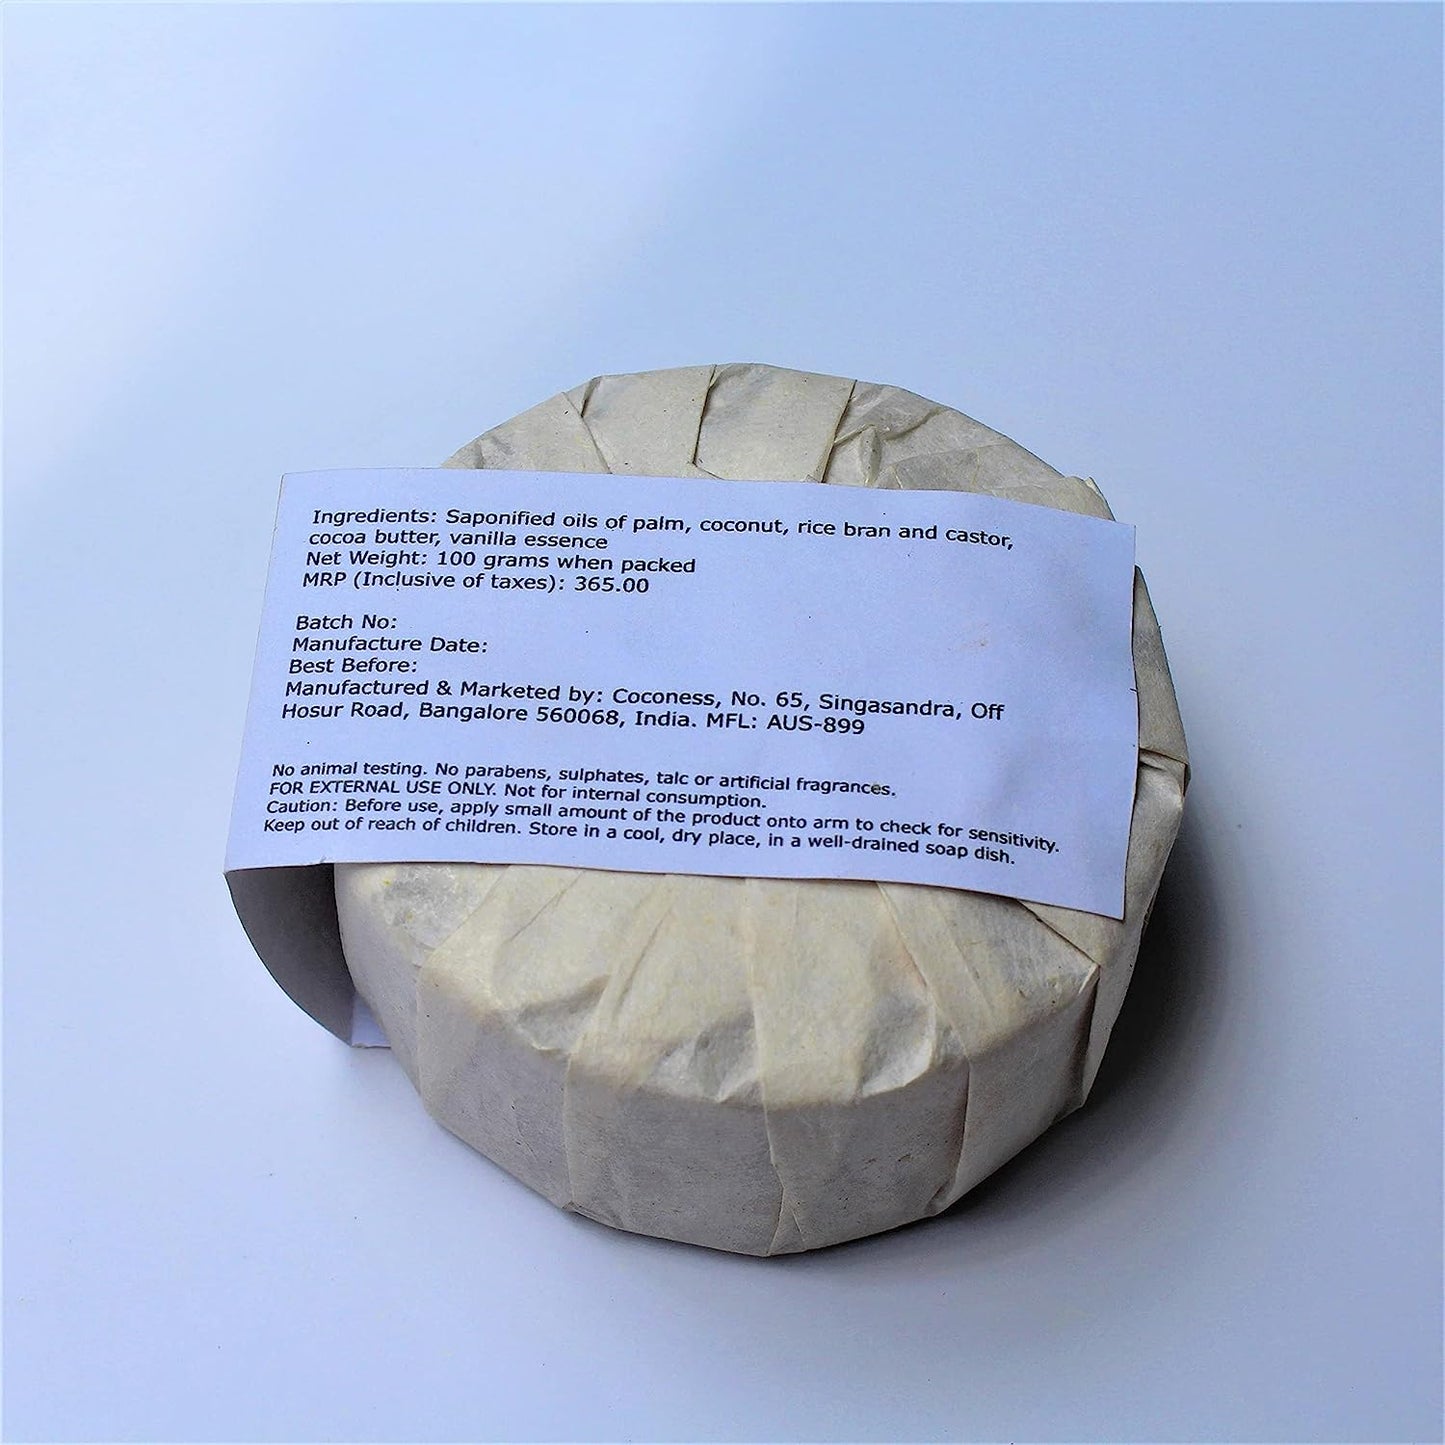 Coconess Cocoa Butter Soap | Delicate. Mildly Scented. | 100% Natural. Handcrafted | 100 gms.